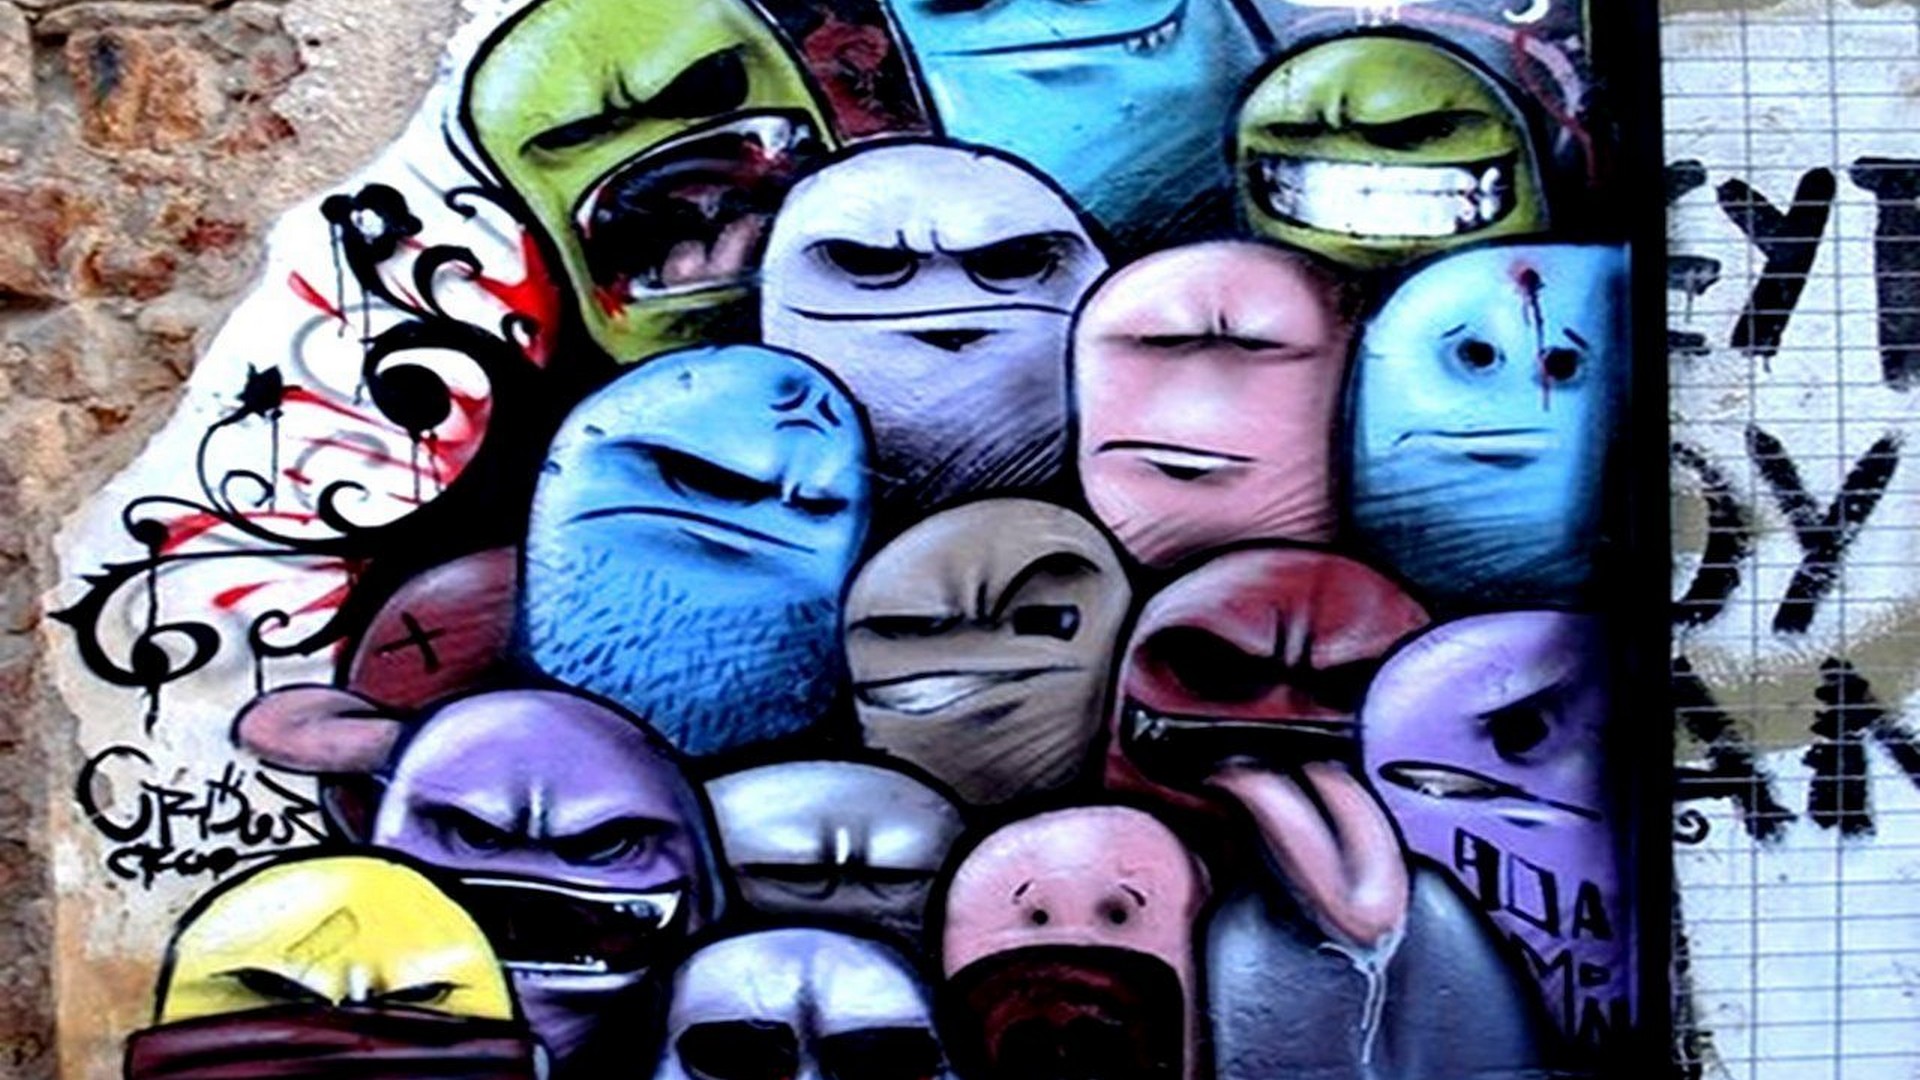 Street Art Wallpaper HD With Resolution 1920X1080 pixel. You can make this wallpaper for your Desktop Computer Backgrounds, Mac Wallpapers, Android Lock screen or iPhone Screensavers